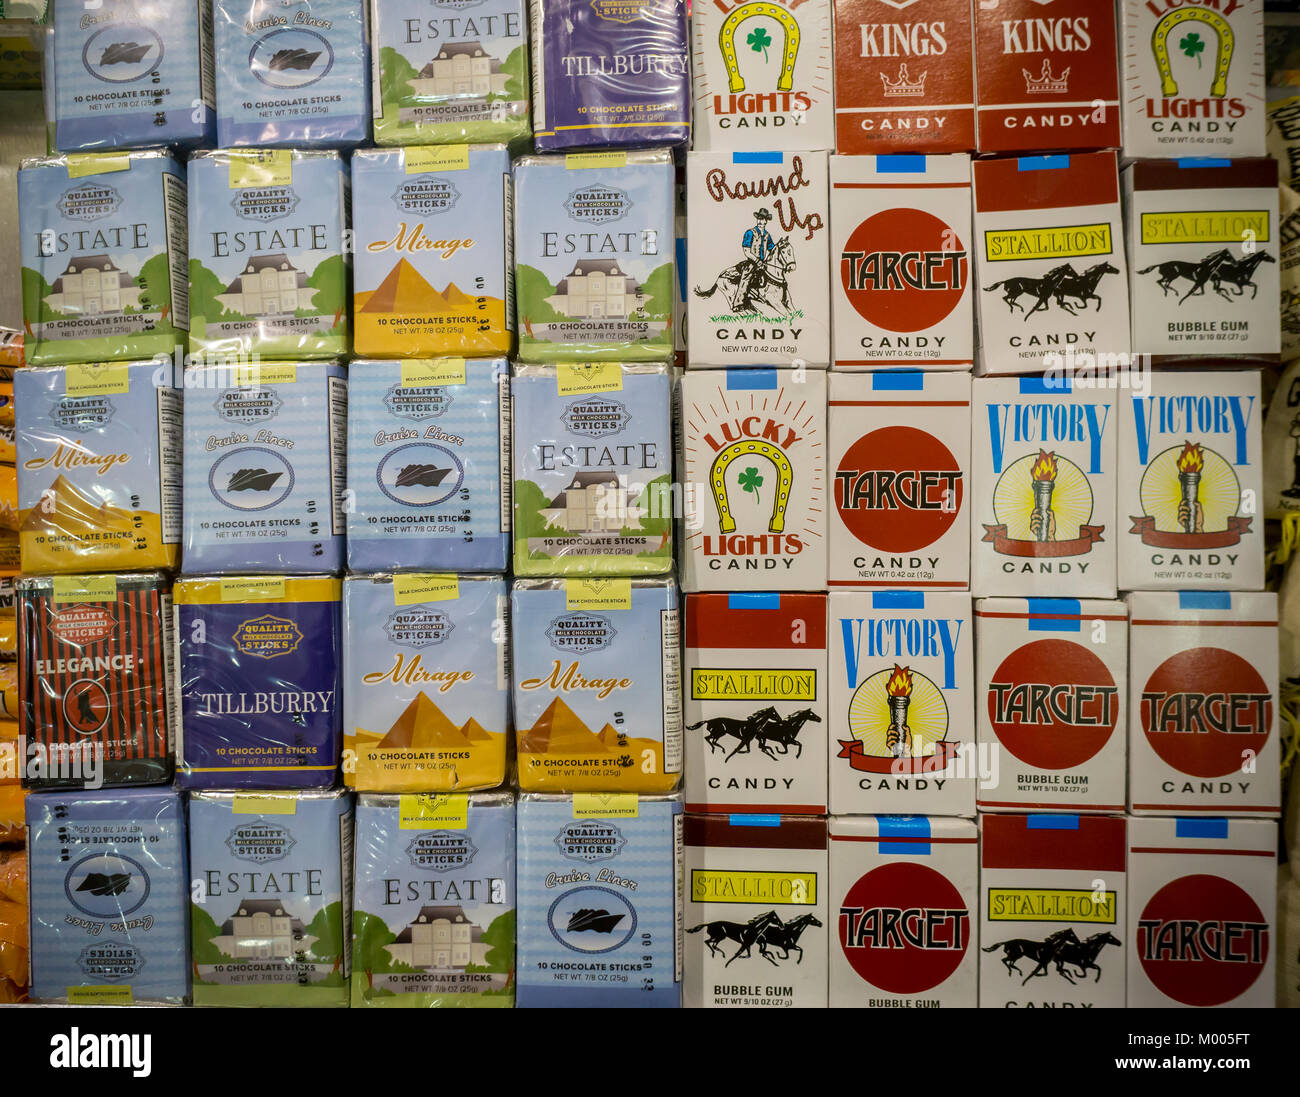 A selection of candy cigarettes in a store in New York on Tuesday, January 16, 2018. Many anti-smoking activists believe that the faux tobacco products desensitizes children, leading them to become smokers. (Â© Richard B. Levine) Stock Photo